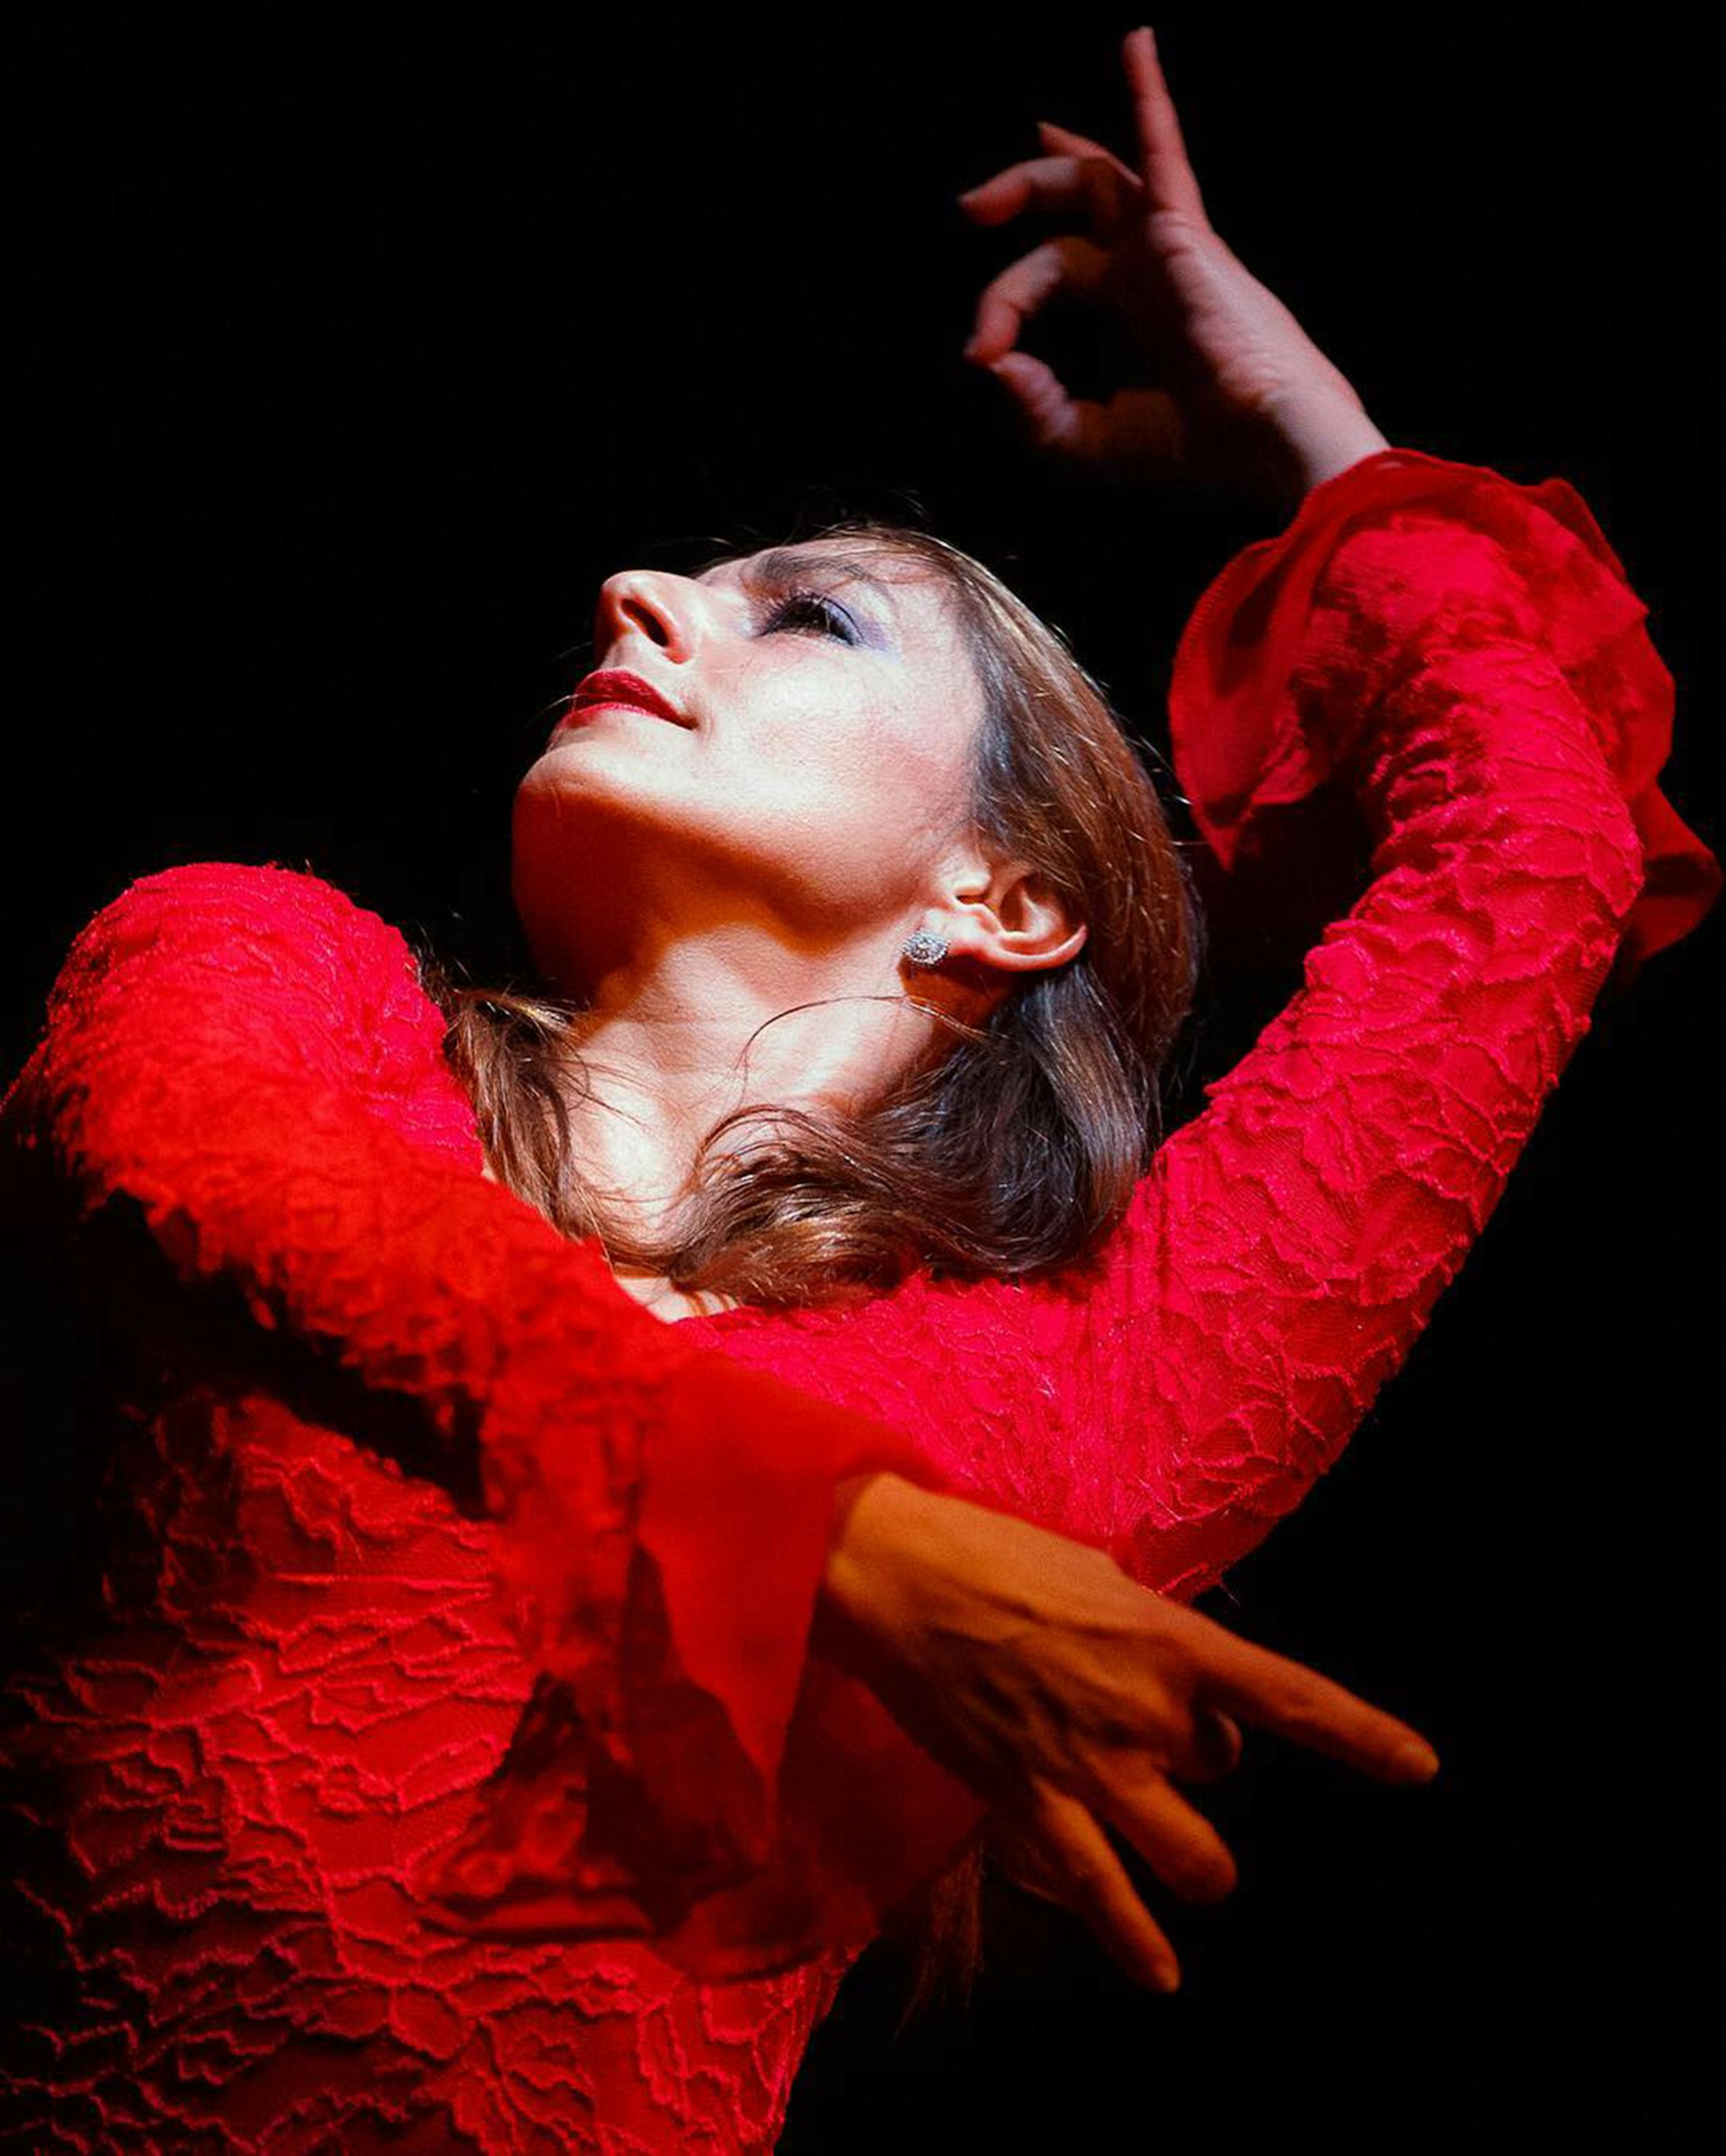 A woman dressed in a red dress strikes a pose during a Flamenco performance